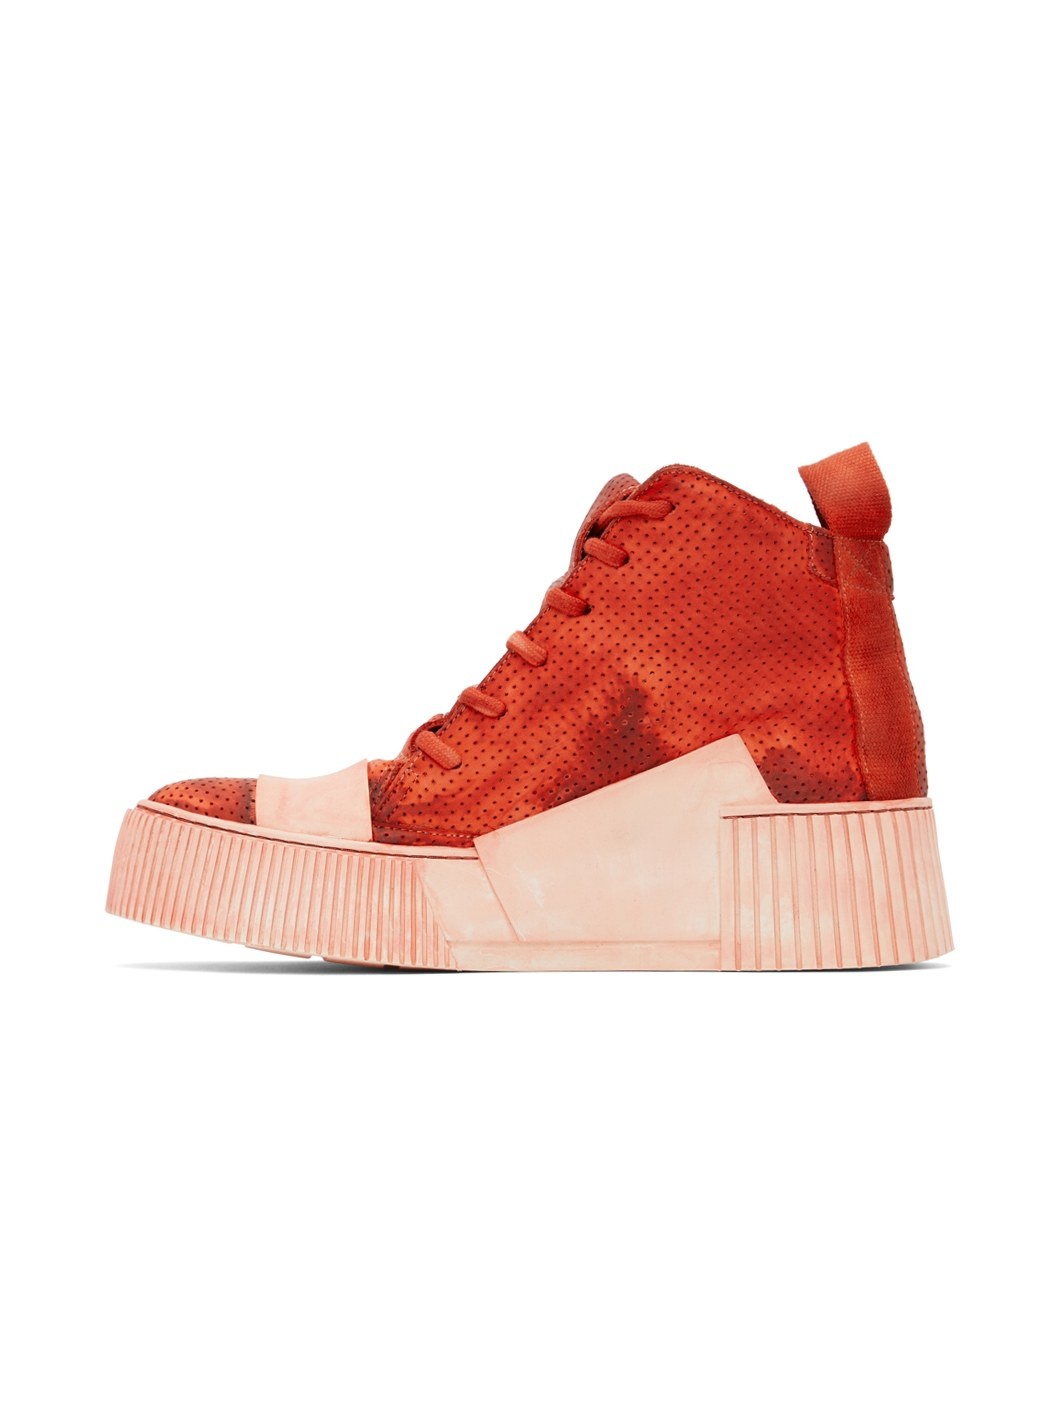 SSENSE Exclusive Red Bamba 1.1 Sneakers - 3